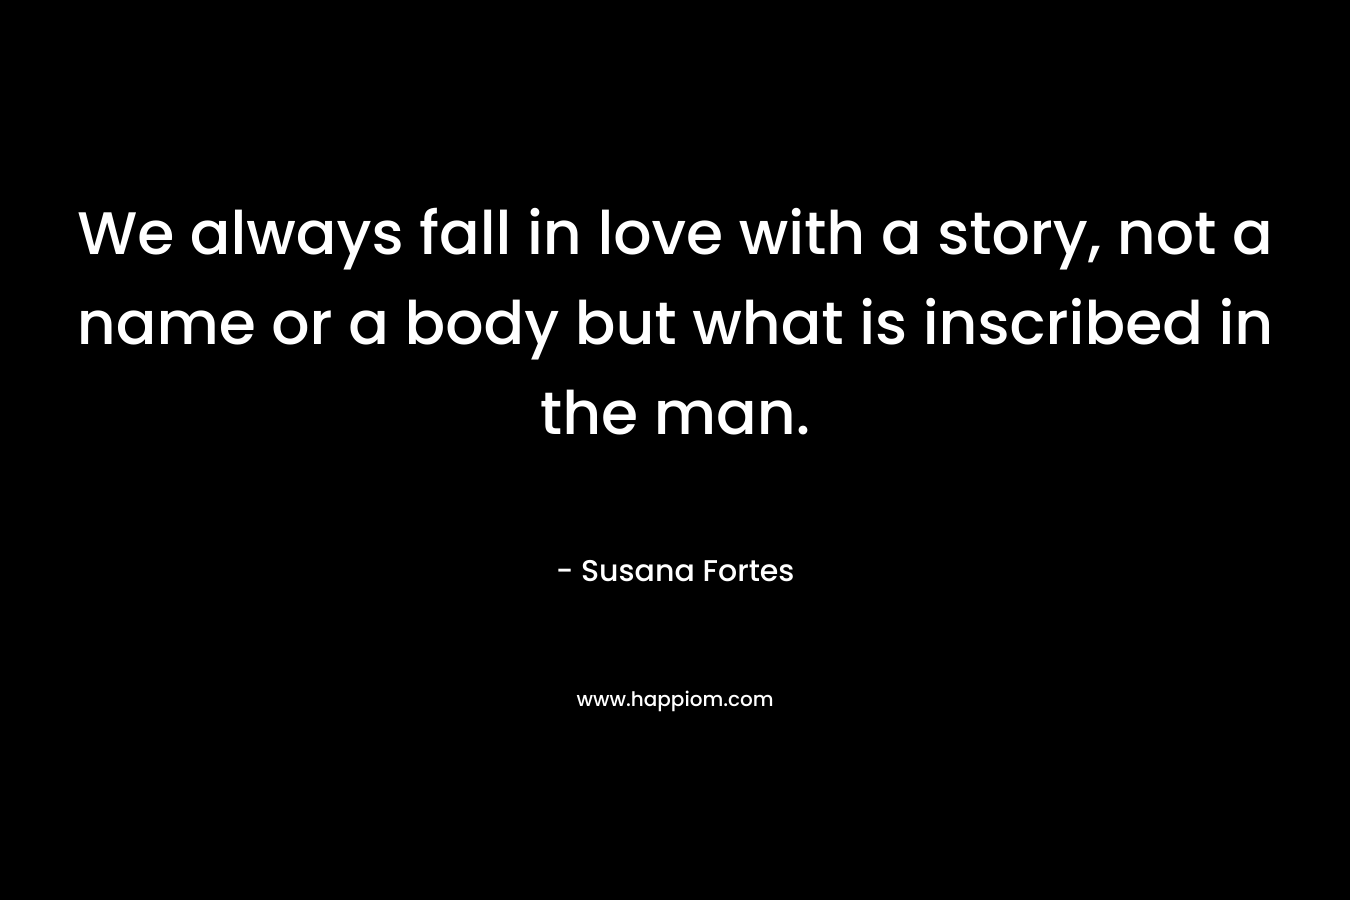 We always fall in love with a story, not a name or a body but what is inscribed in the man.